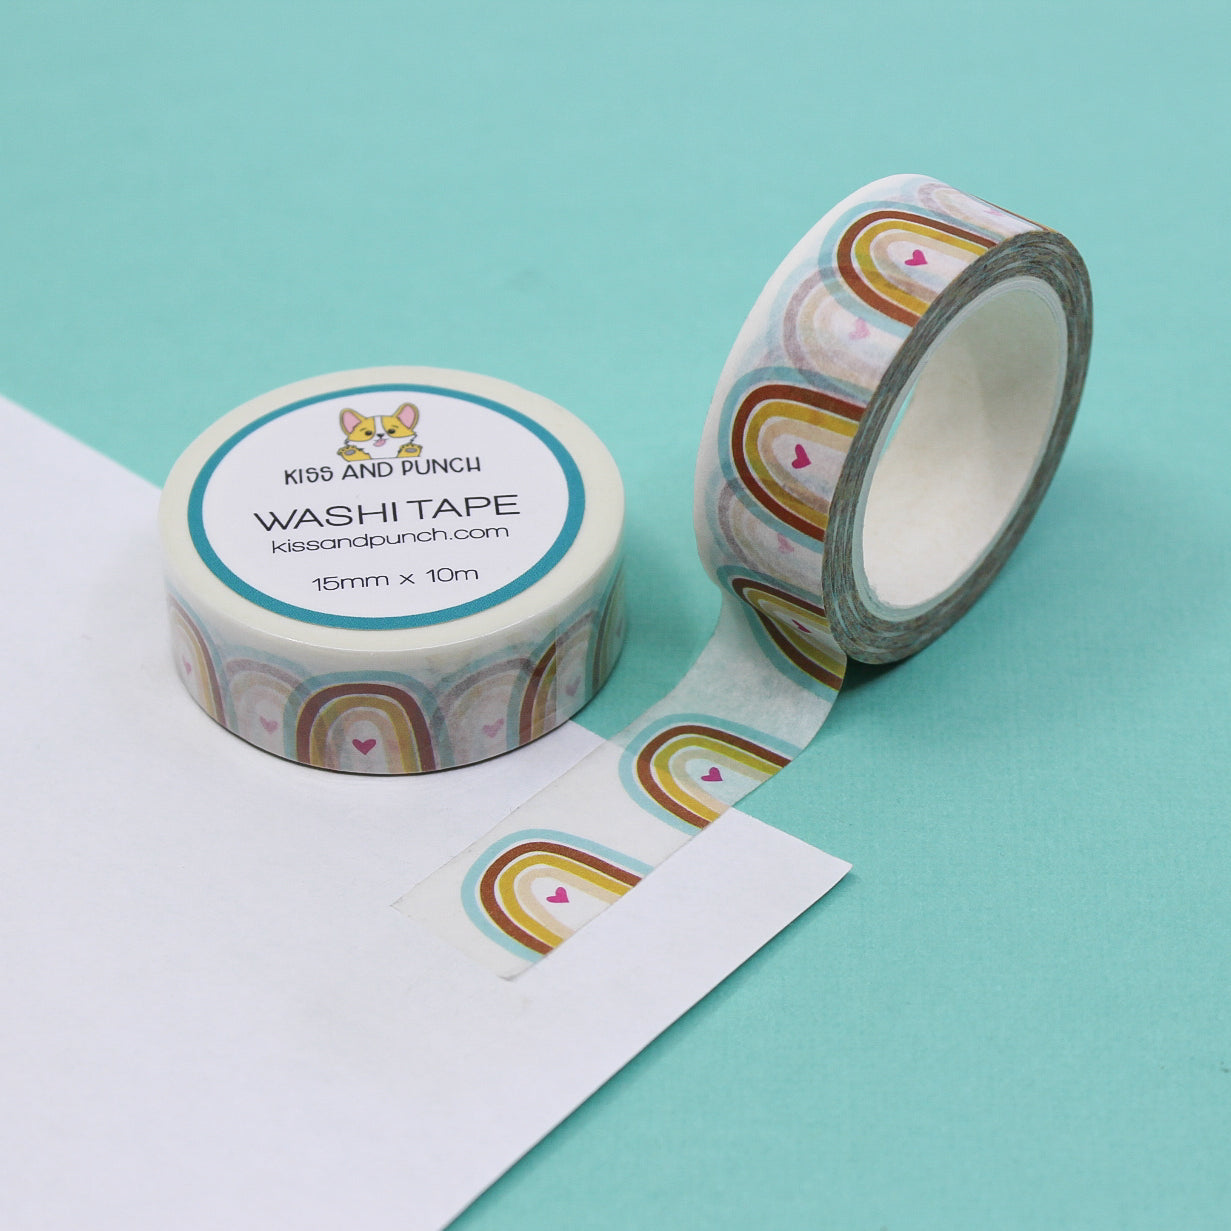 This cheery rainbow washi tape is perfect for so many projects. The bright colors make it modern and will coordinate with any type of color-themed project you might have. This tape is sold at BBB Supplies Craft Shop.